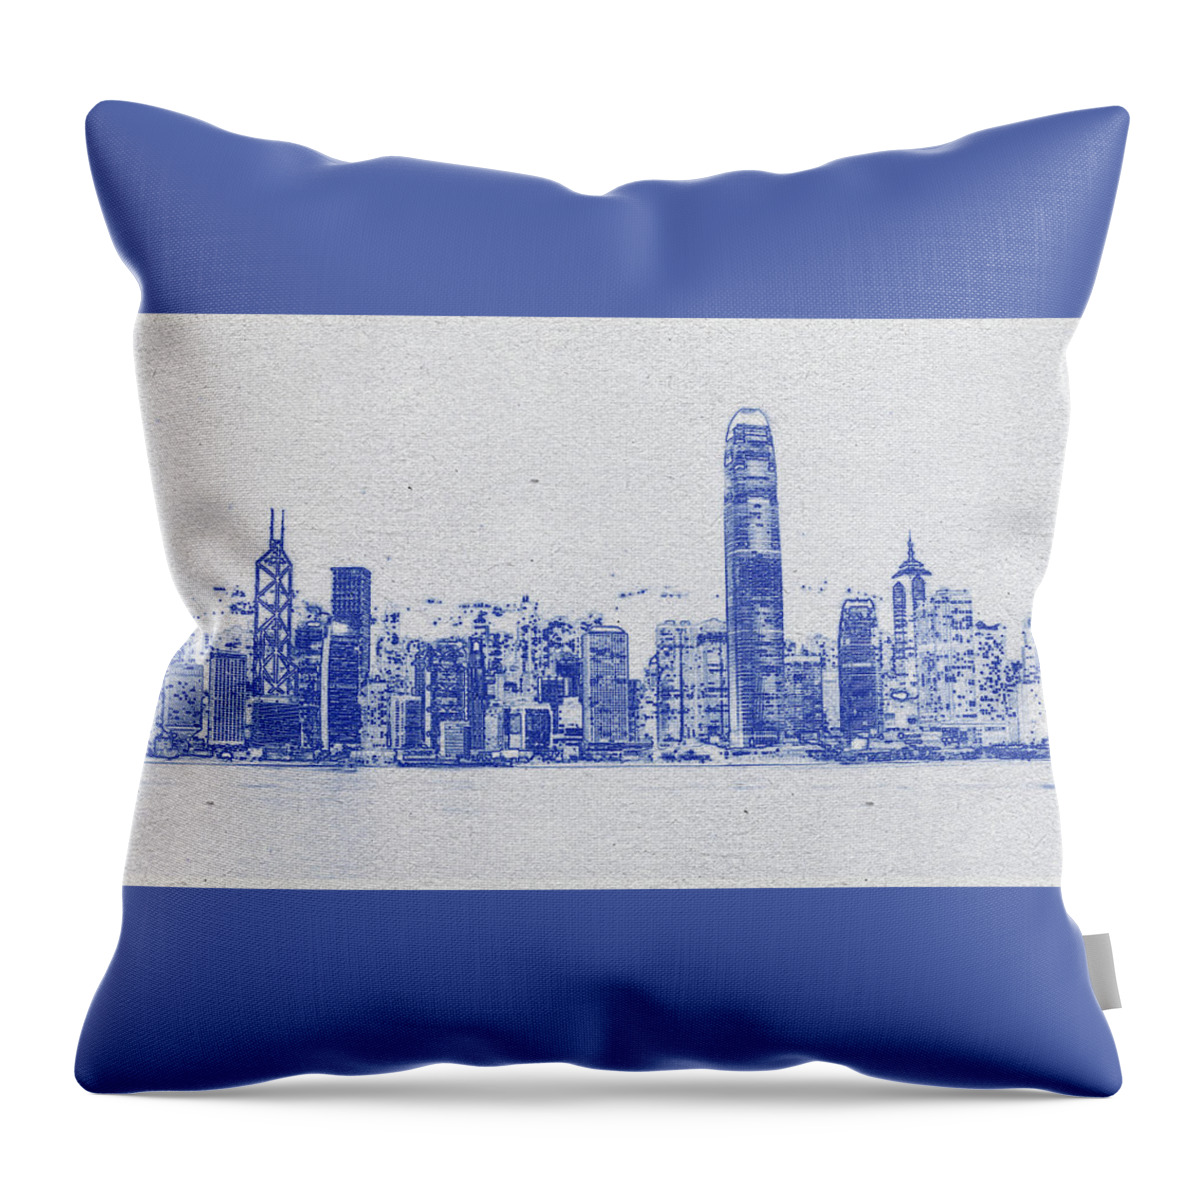 Oil On Canvas Throw Pillow featuring the digital art Blueprint drawing of Cityscape 01 by Celestial Images